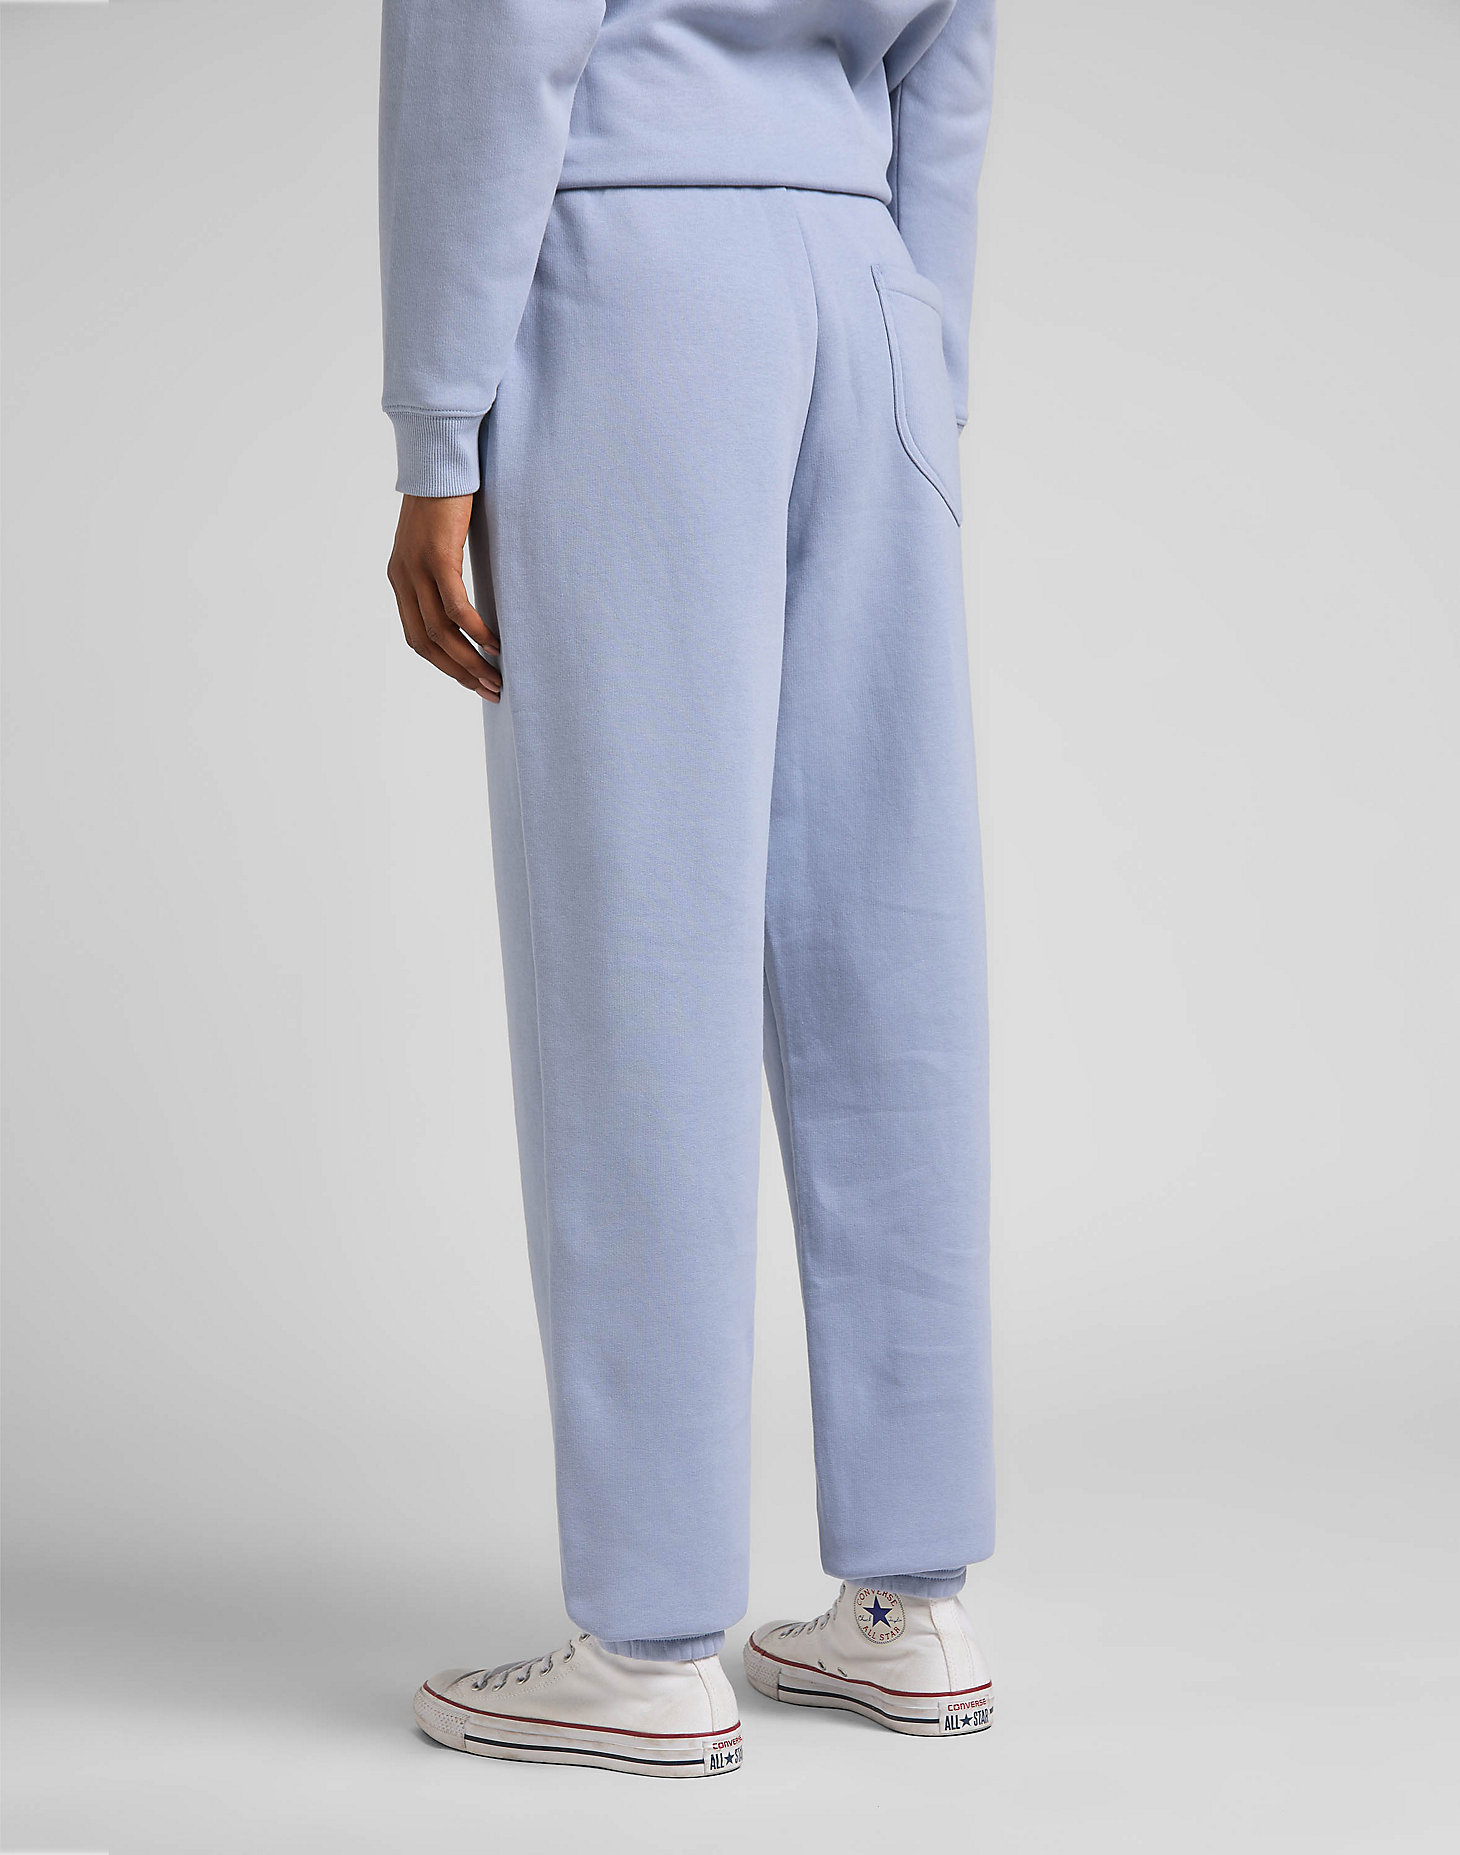 Relaxed Sweatpants in Parry Blue alternative view 1